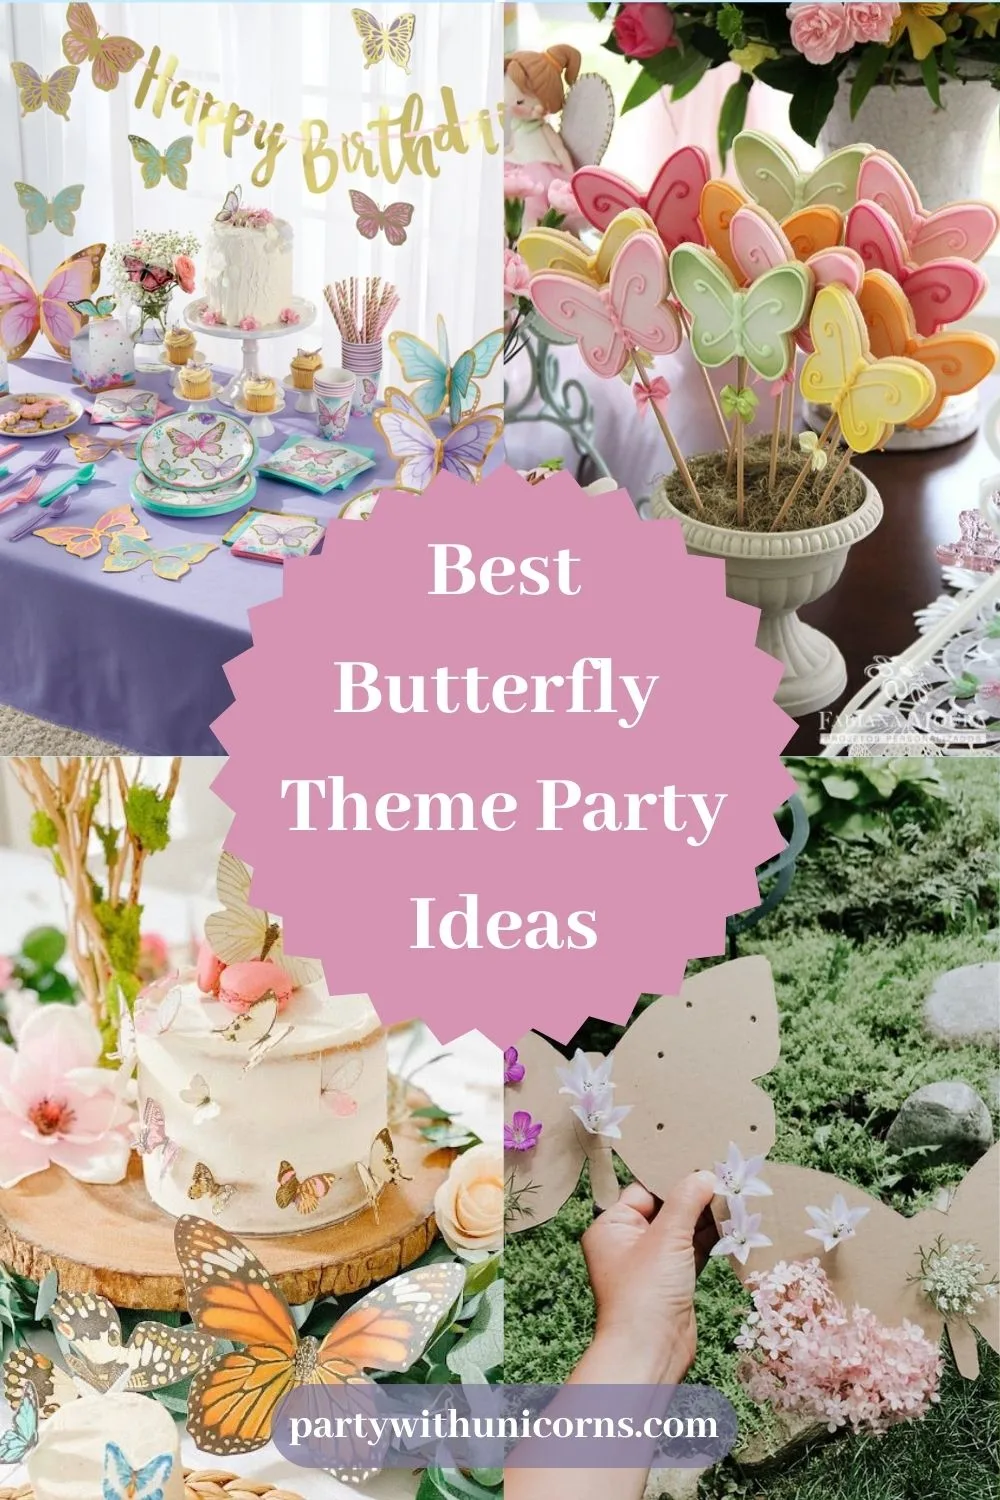 40 Best Butterfly Theme Party Ideas - Party with Unicorns